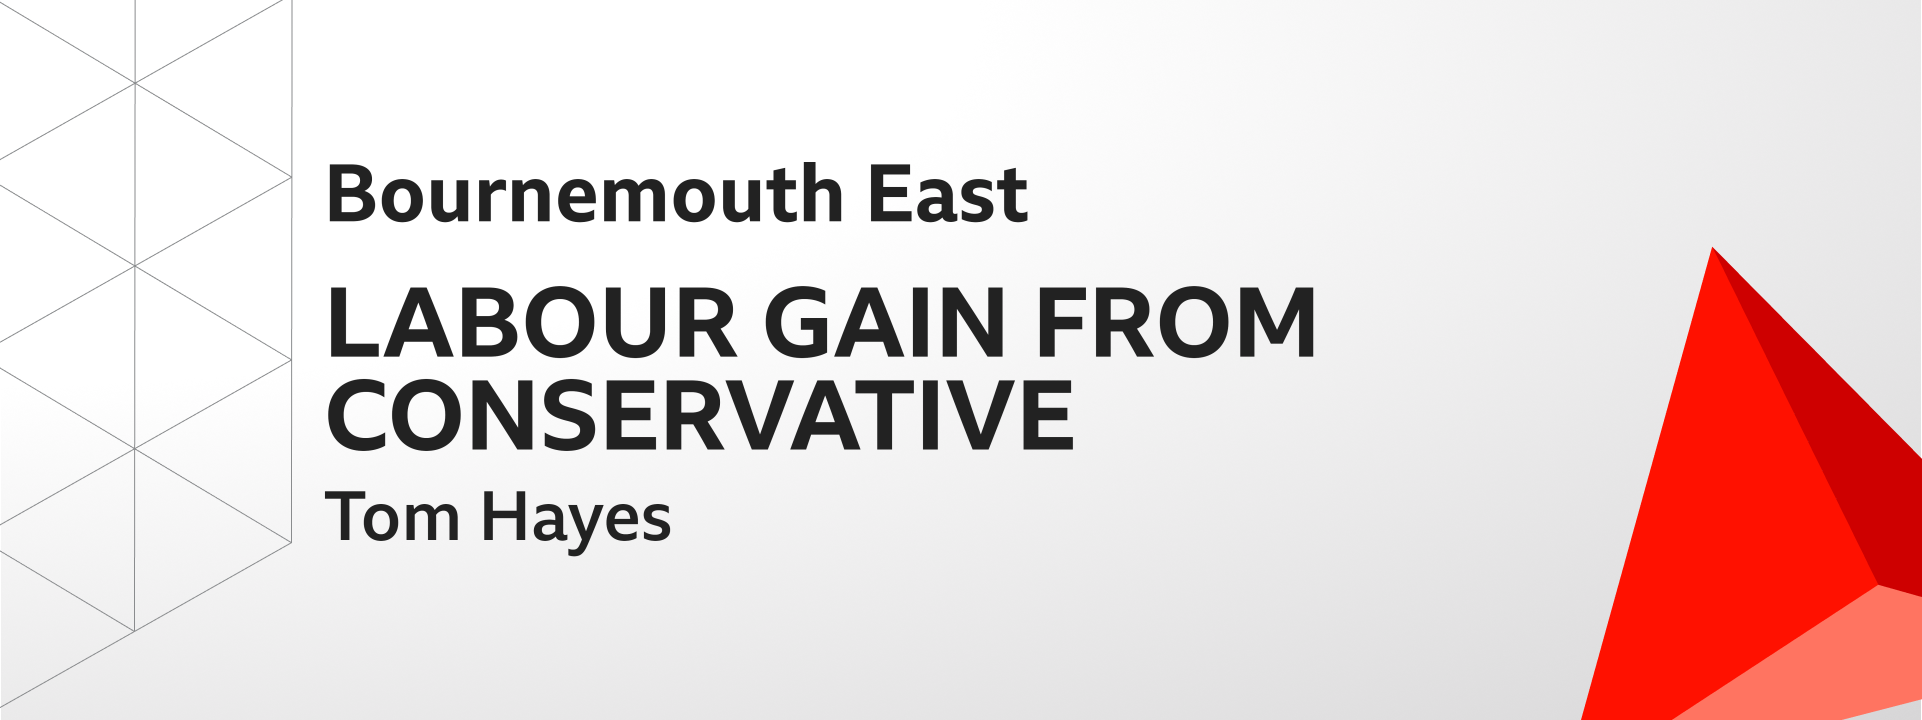 Graphic showing Labour gains Bournemouth East from the Conservatives. The winning candidate was Tom Hayes.